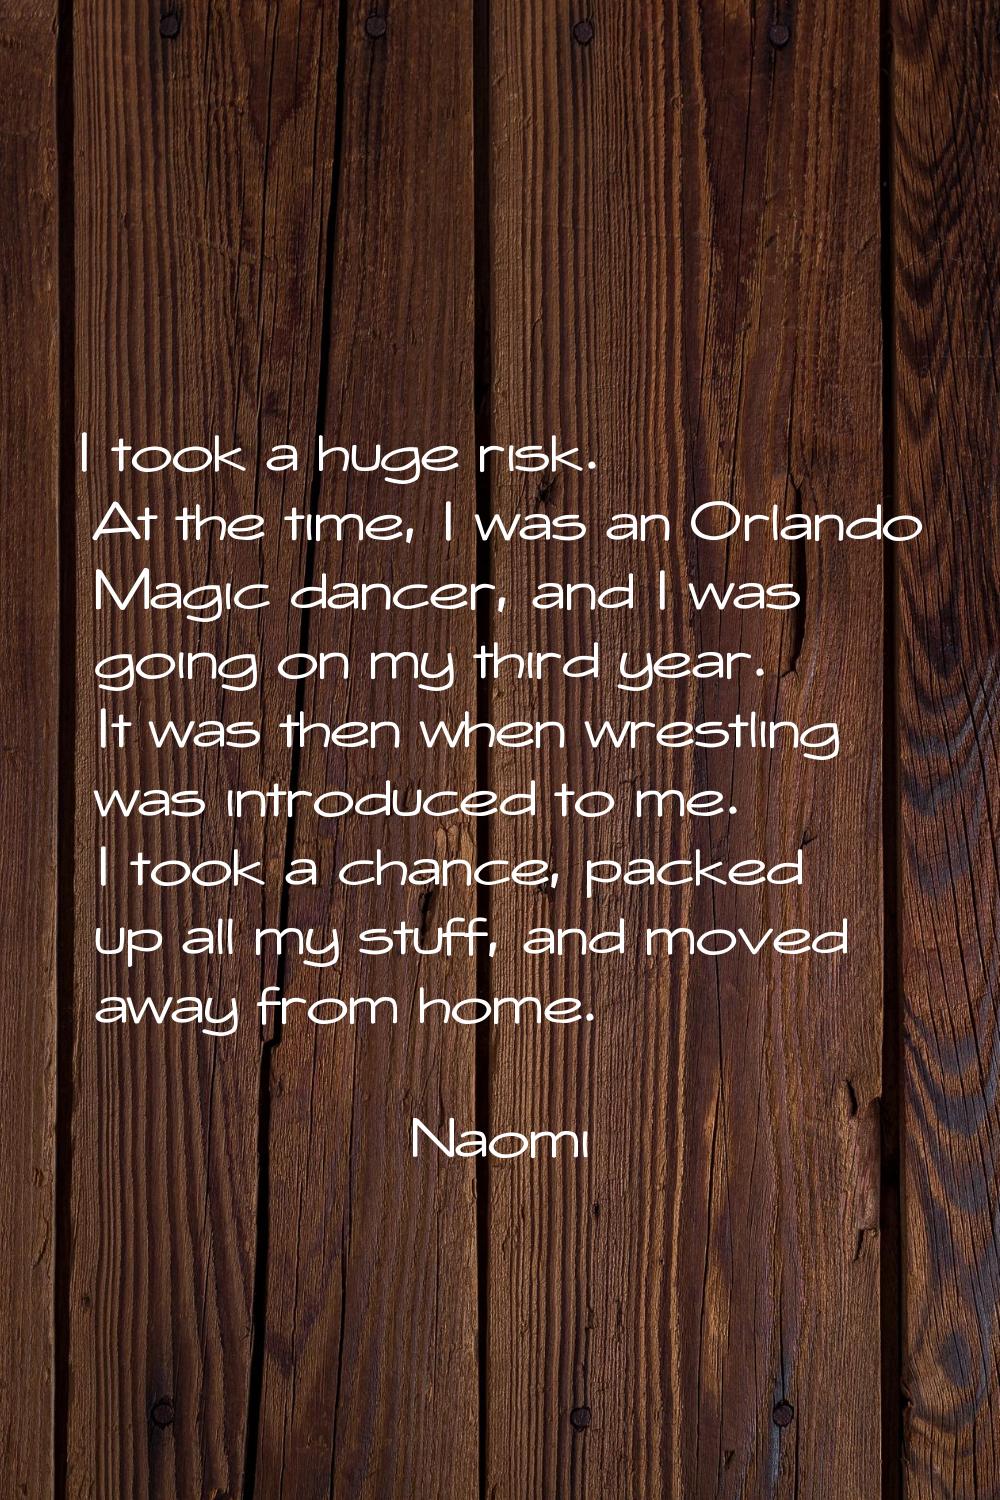 I took a huge risk. At the time, I was an Orlando Magic dancer, and I was going on my third year. I